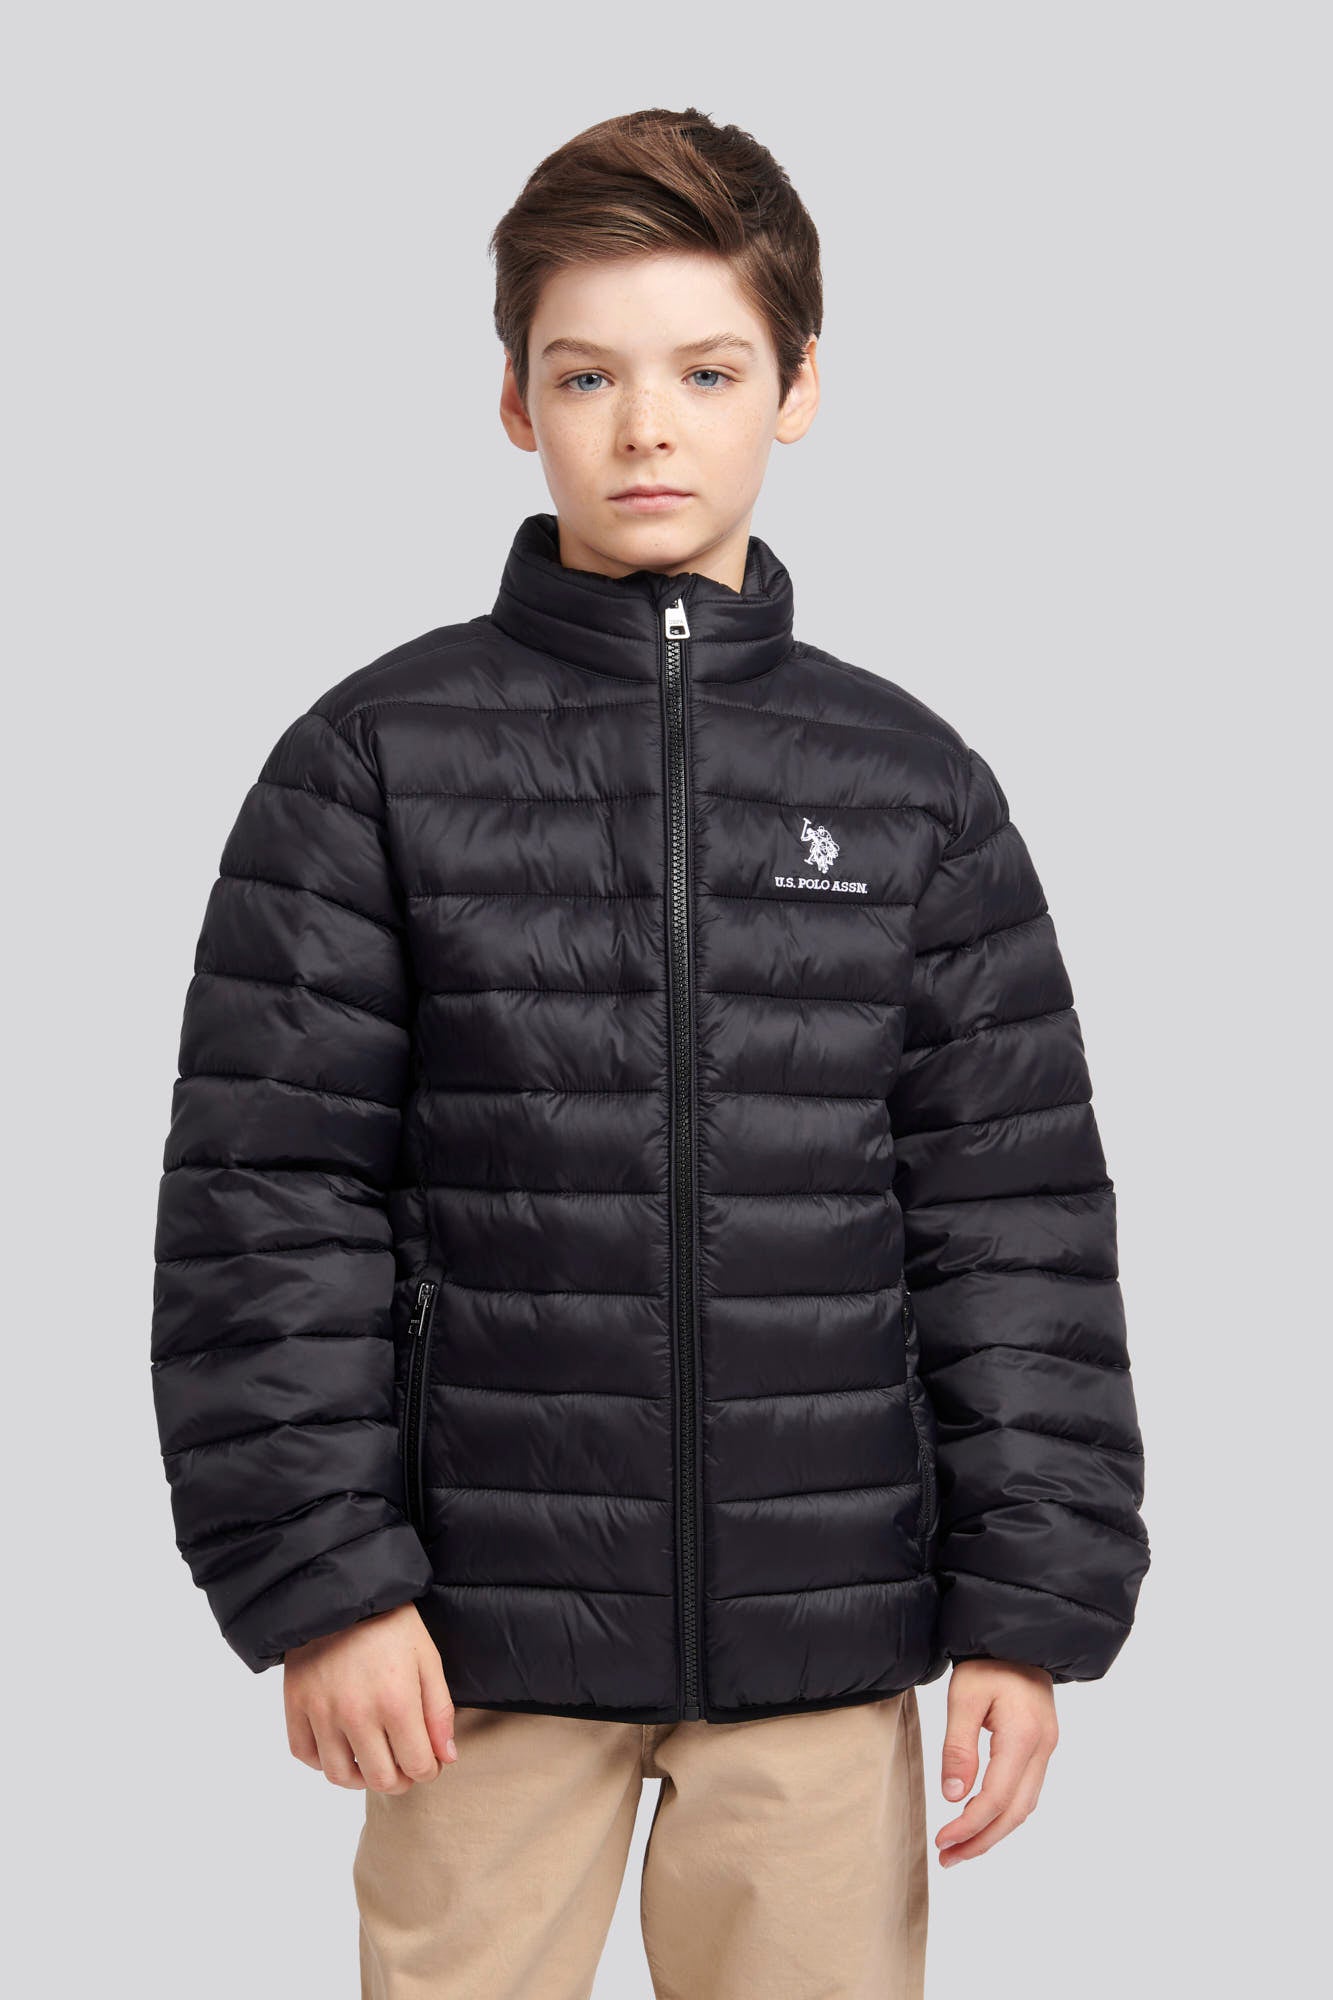 U.S. Polo Assn. Boys Lightweight Bound Quilted Jacket in Black Bright White DHM